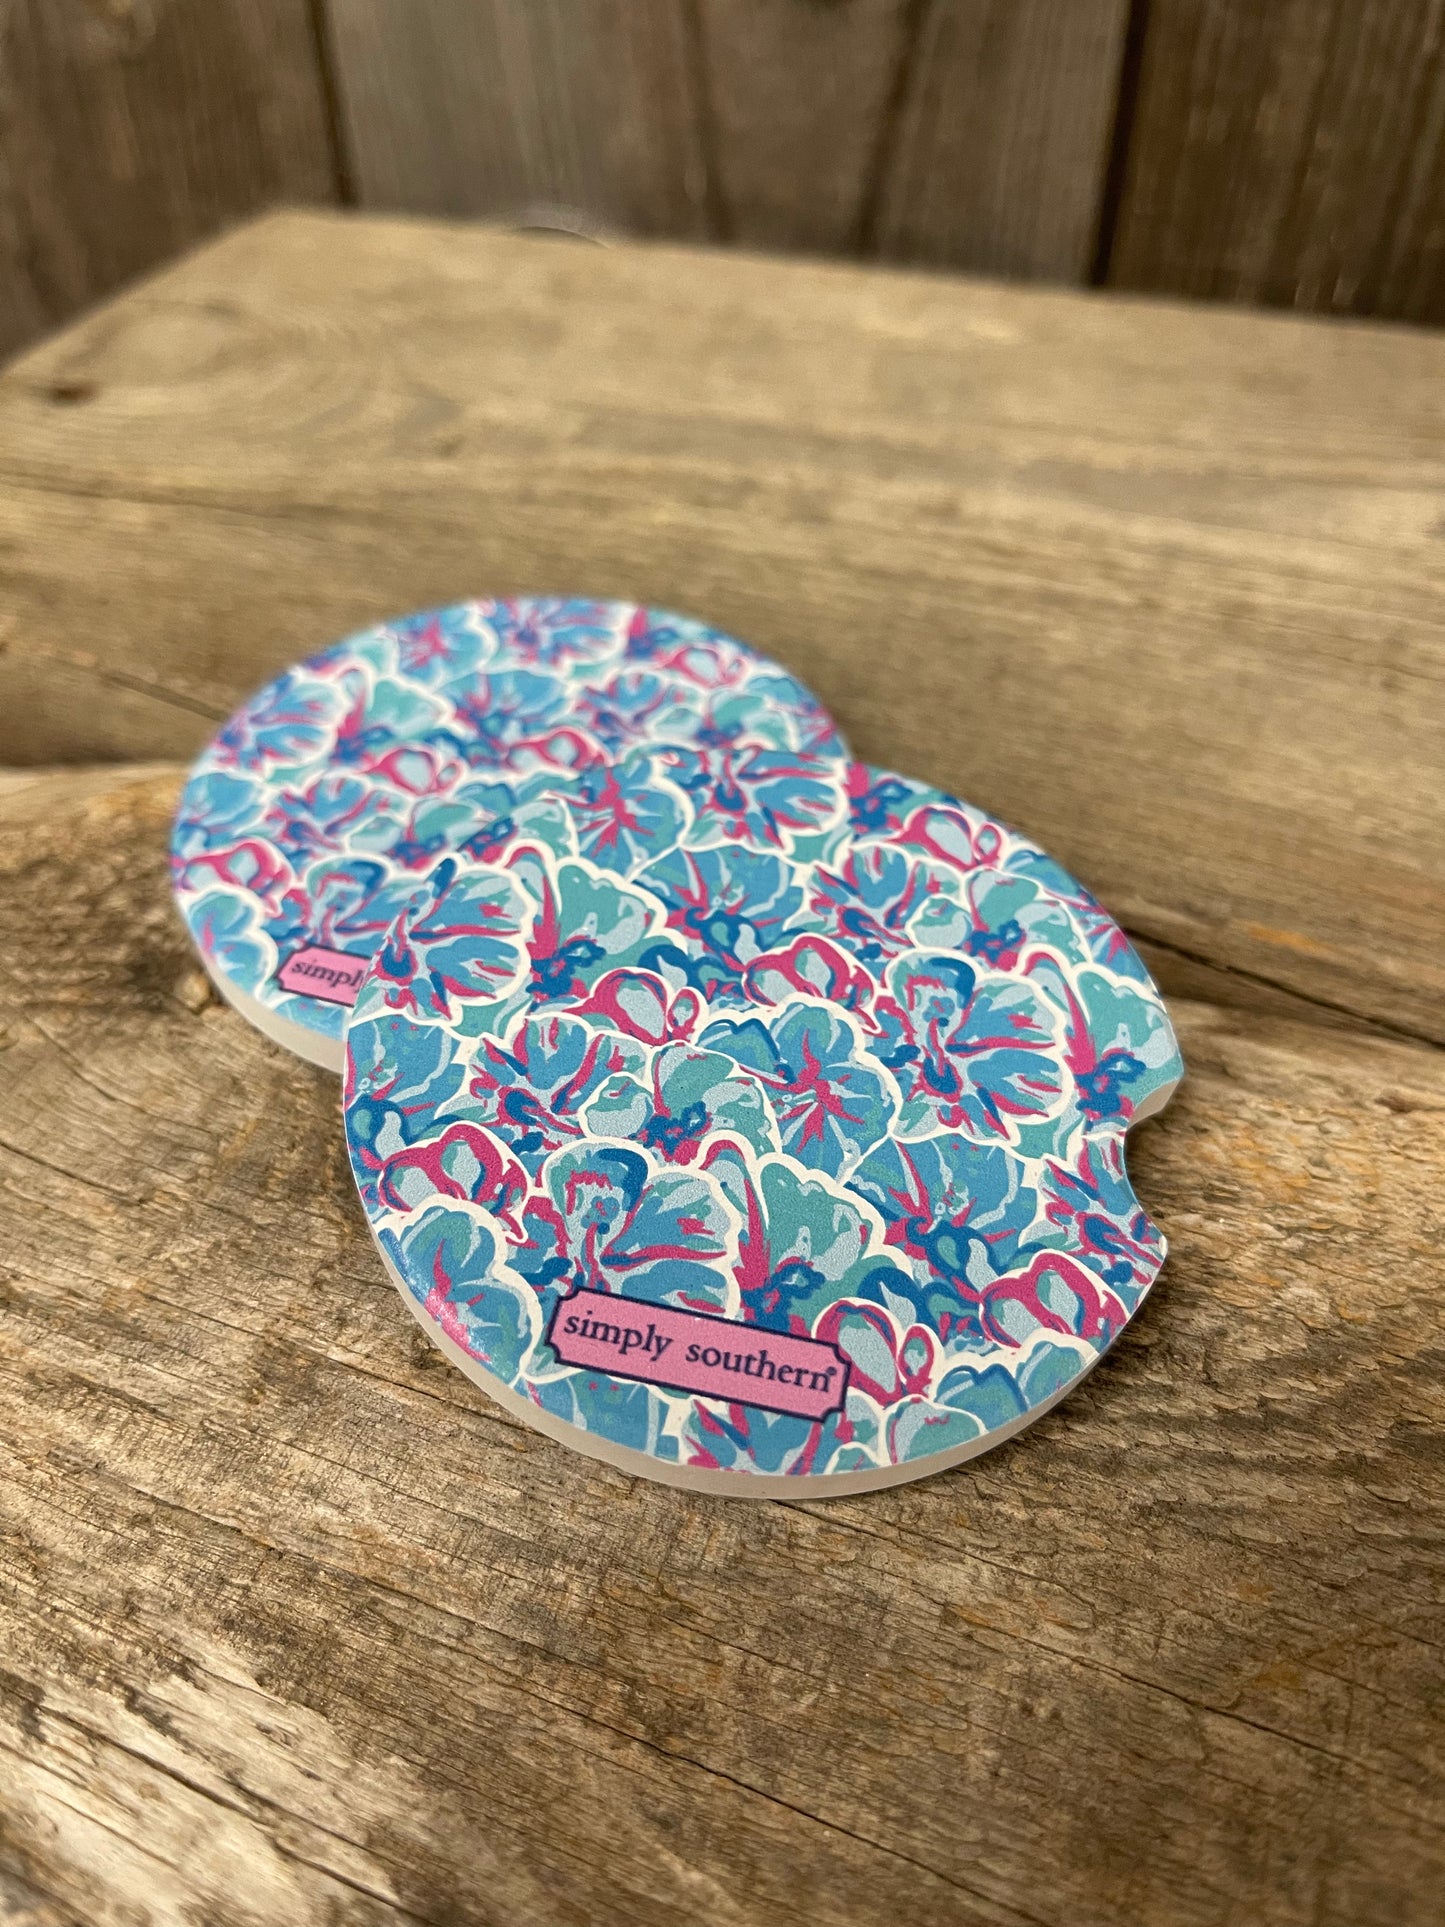 Simply Southern - Car Coasters - Asst. Designs